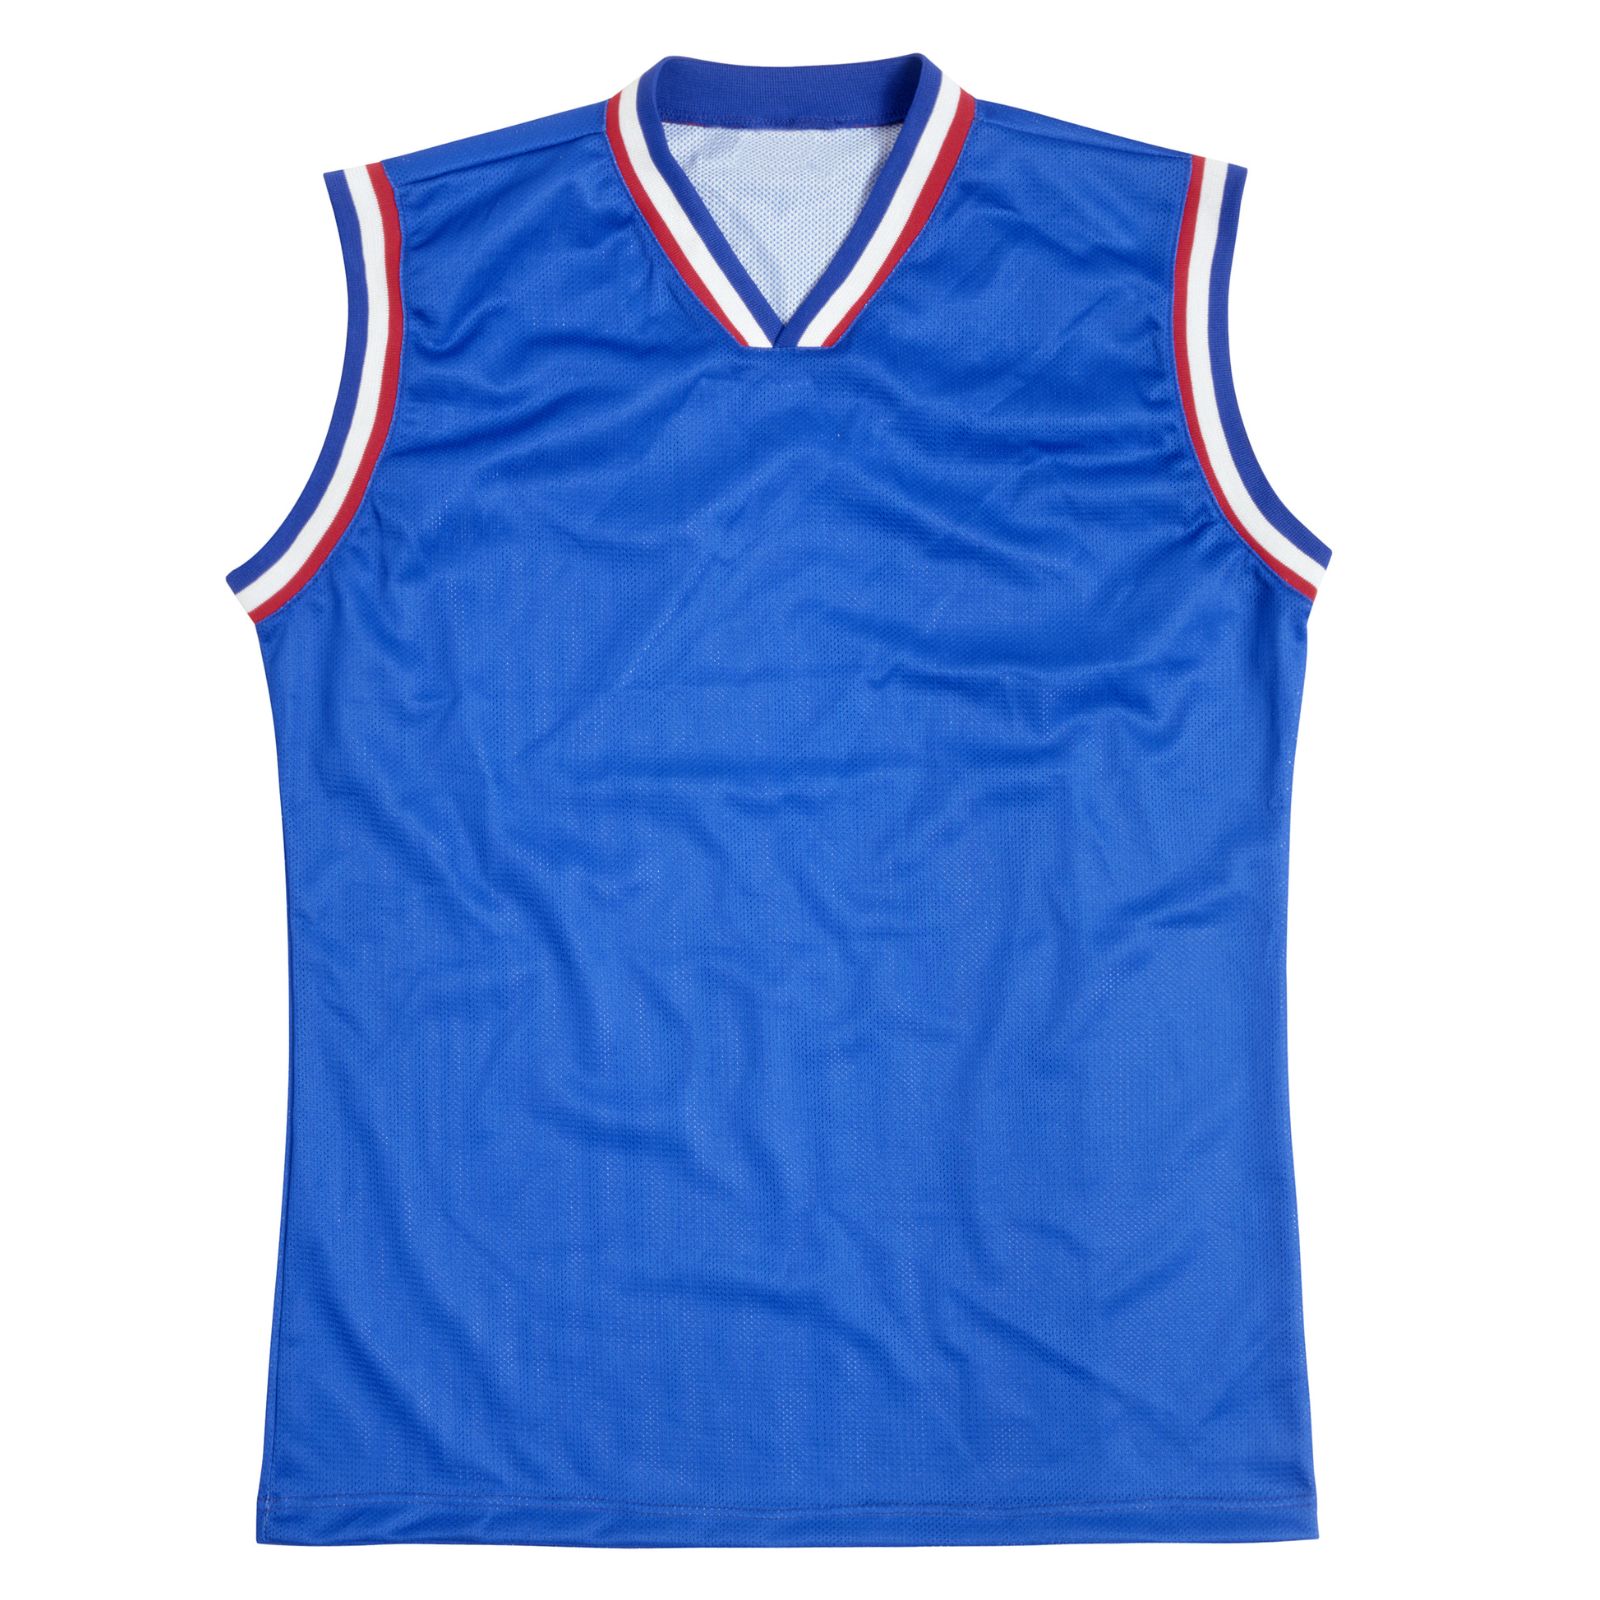 Blue Baseball Jerseys Manufactured By The X Athletic Wear The Leading Baseball Jerseys Manufacturer In Pakistan.